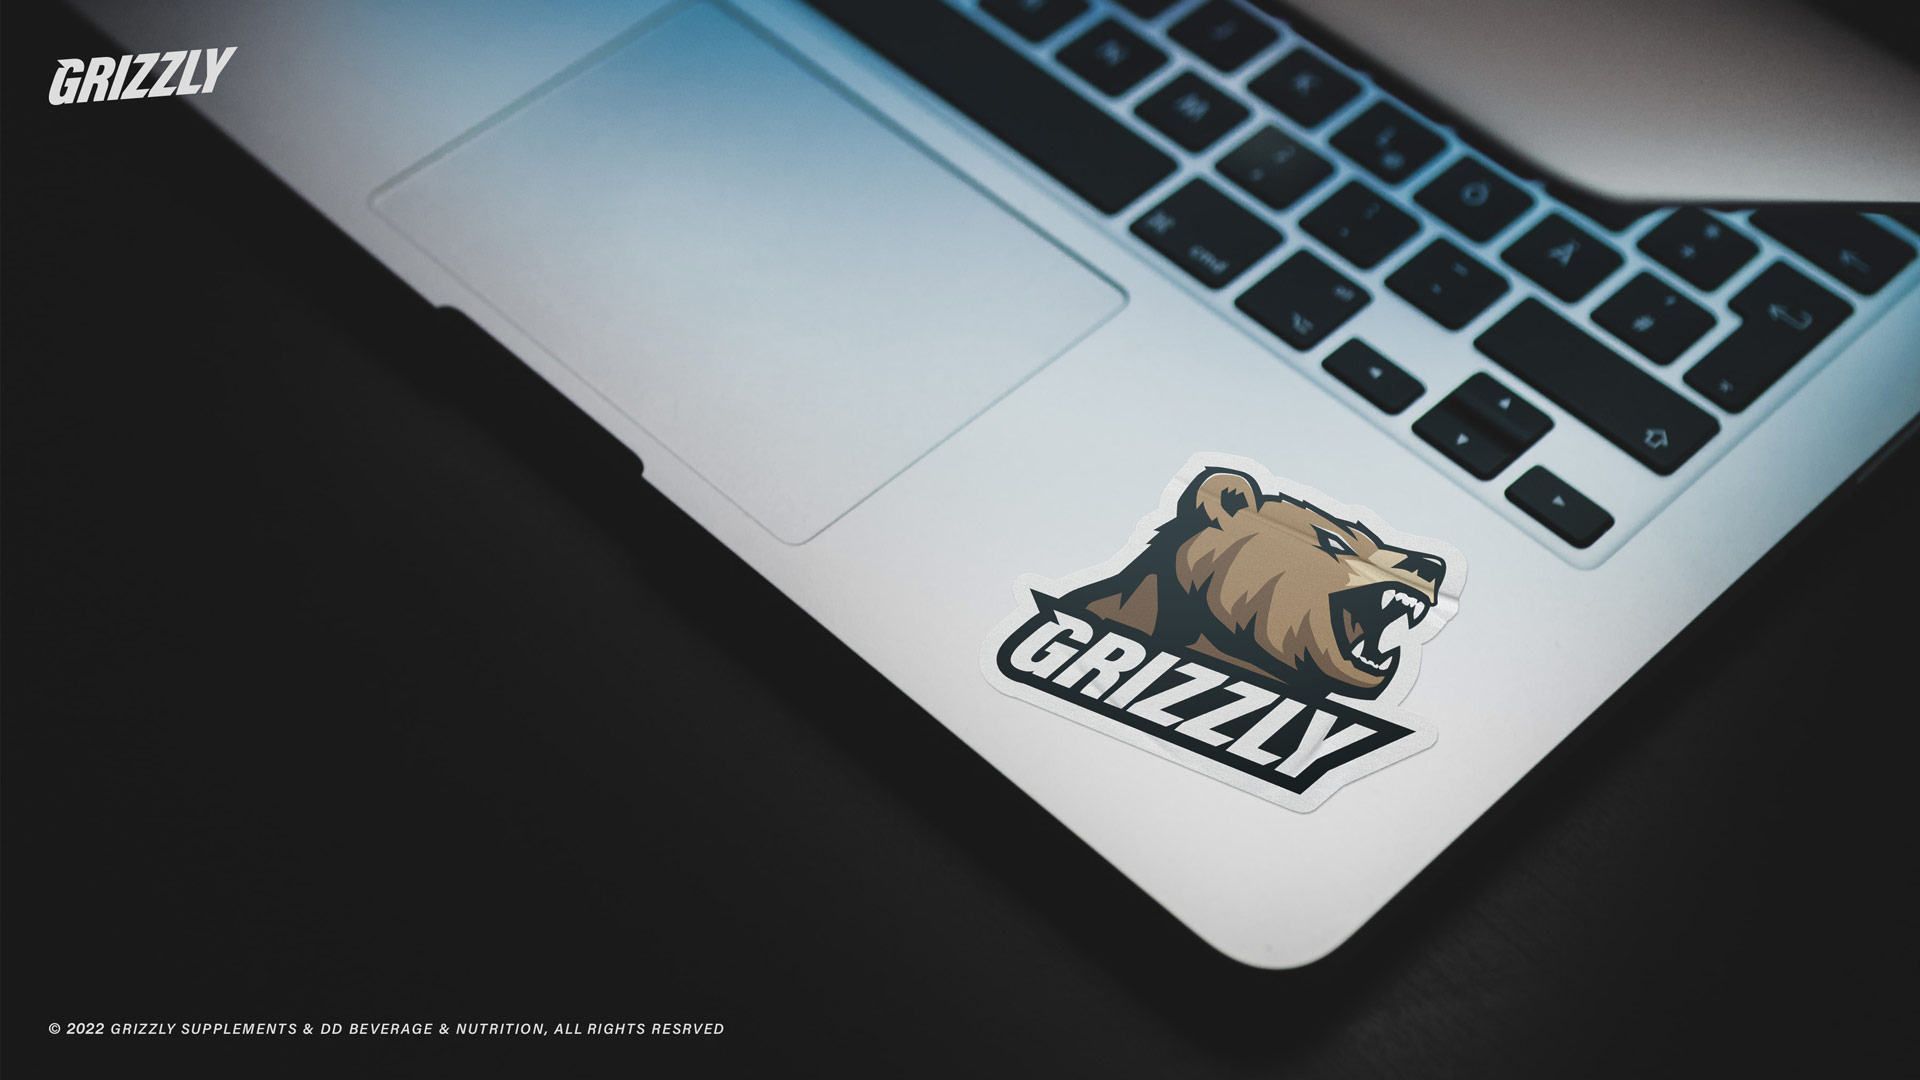 Grizzly_Mockup_Computer_Sticker_04a